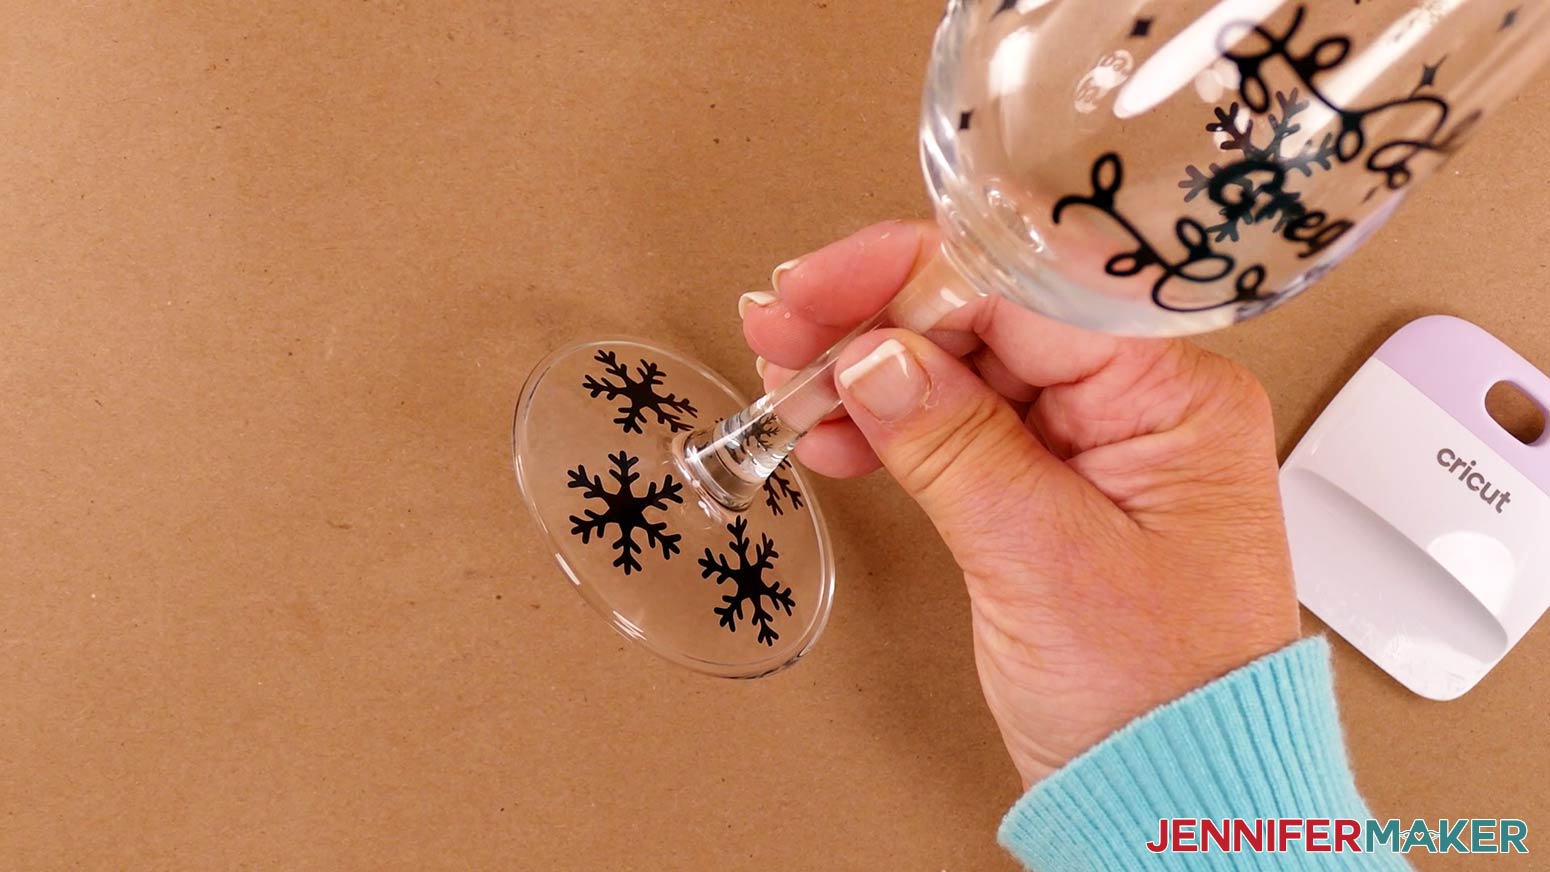 Apply the additional vinyl snowflakes around the base of your wine glass using transfer tape or your fingers before etching